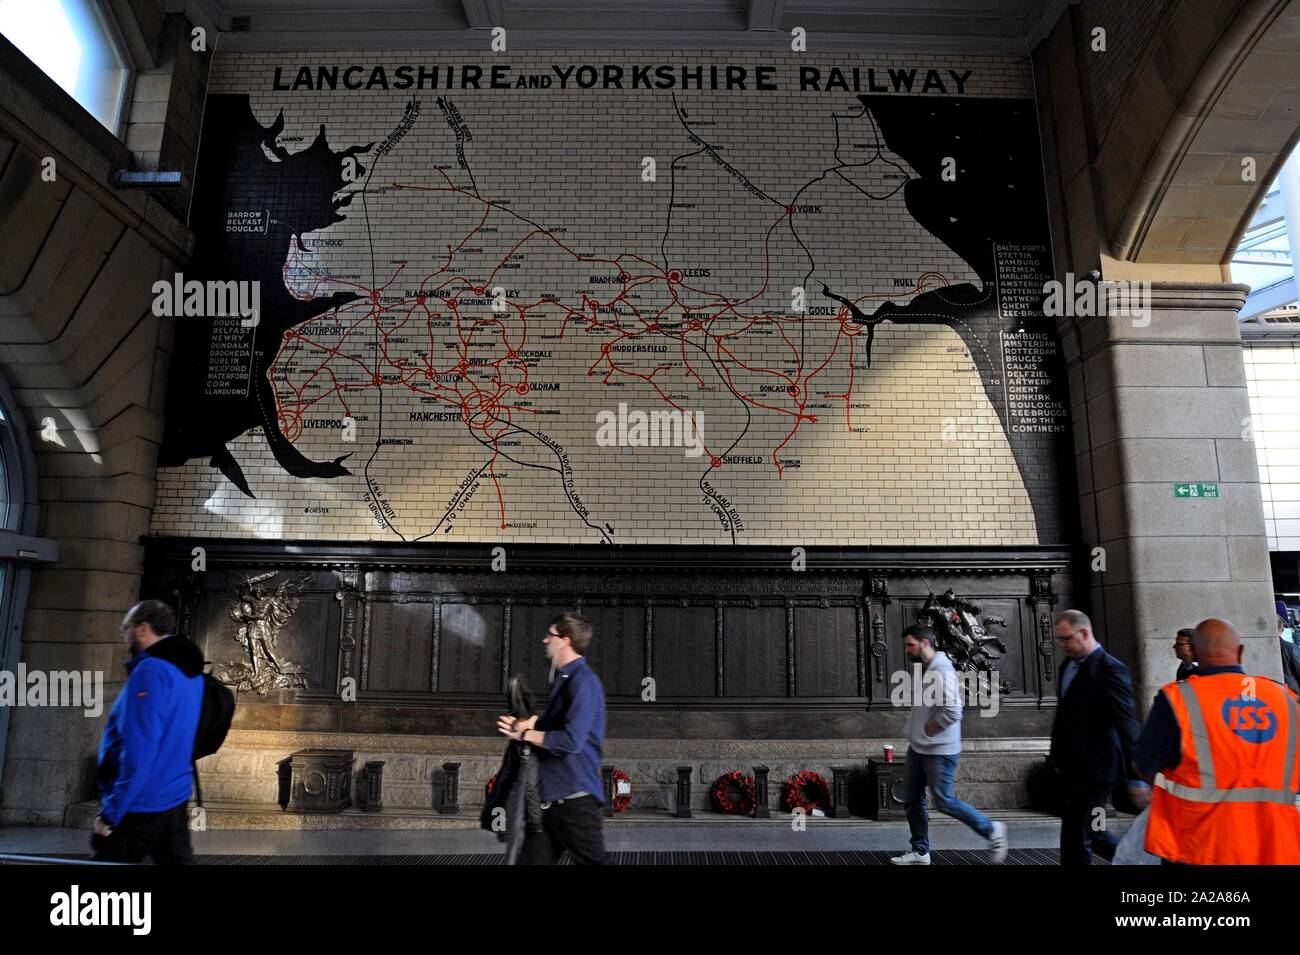 A large tiled wall map of the Lancashire and Yorkshire Railway at Manchester Victoria Station, UK Stock Photo